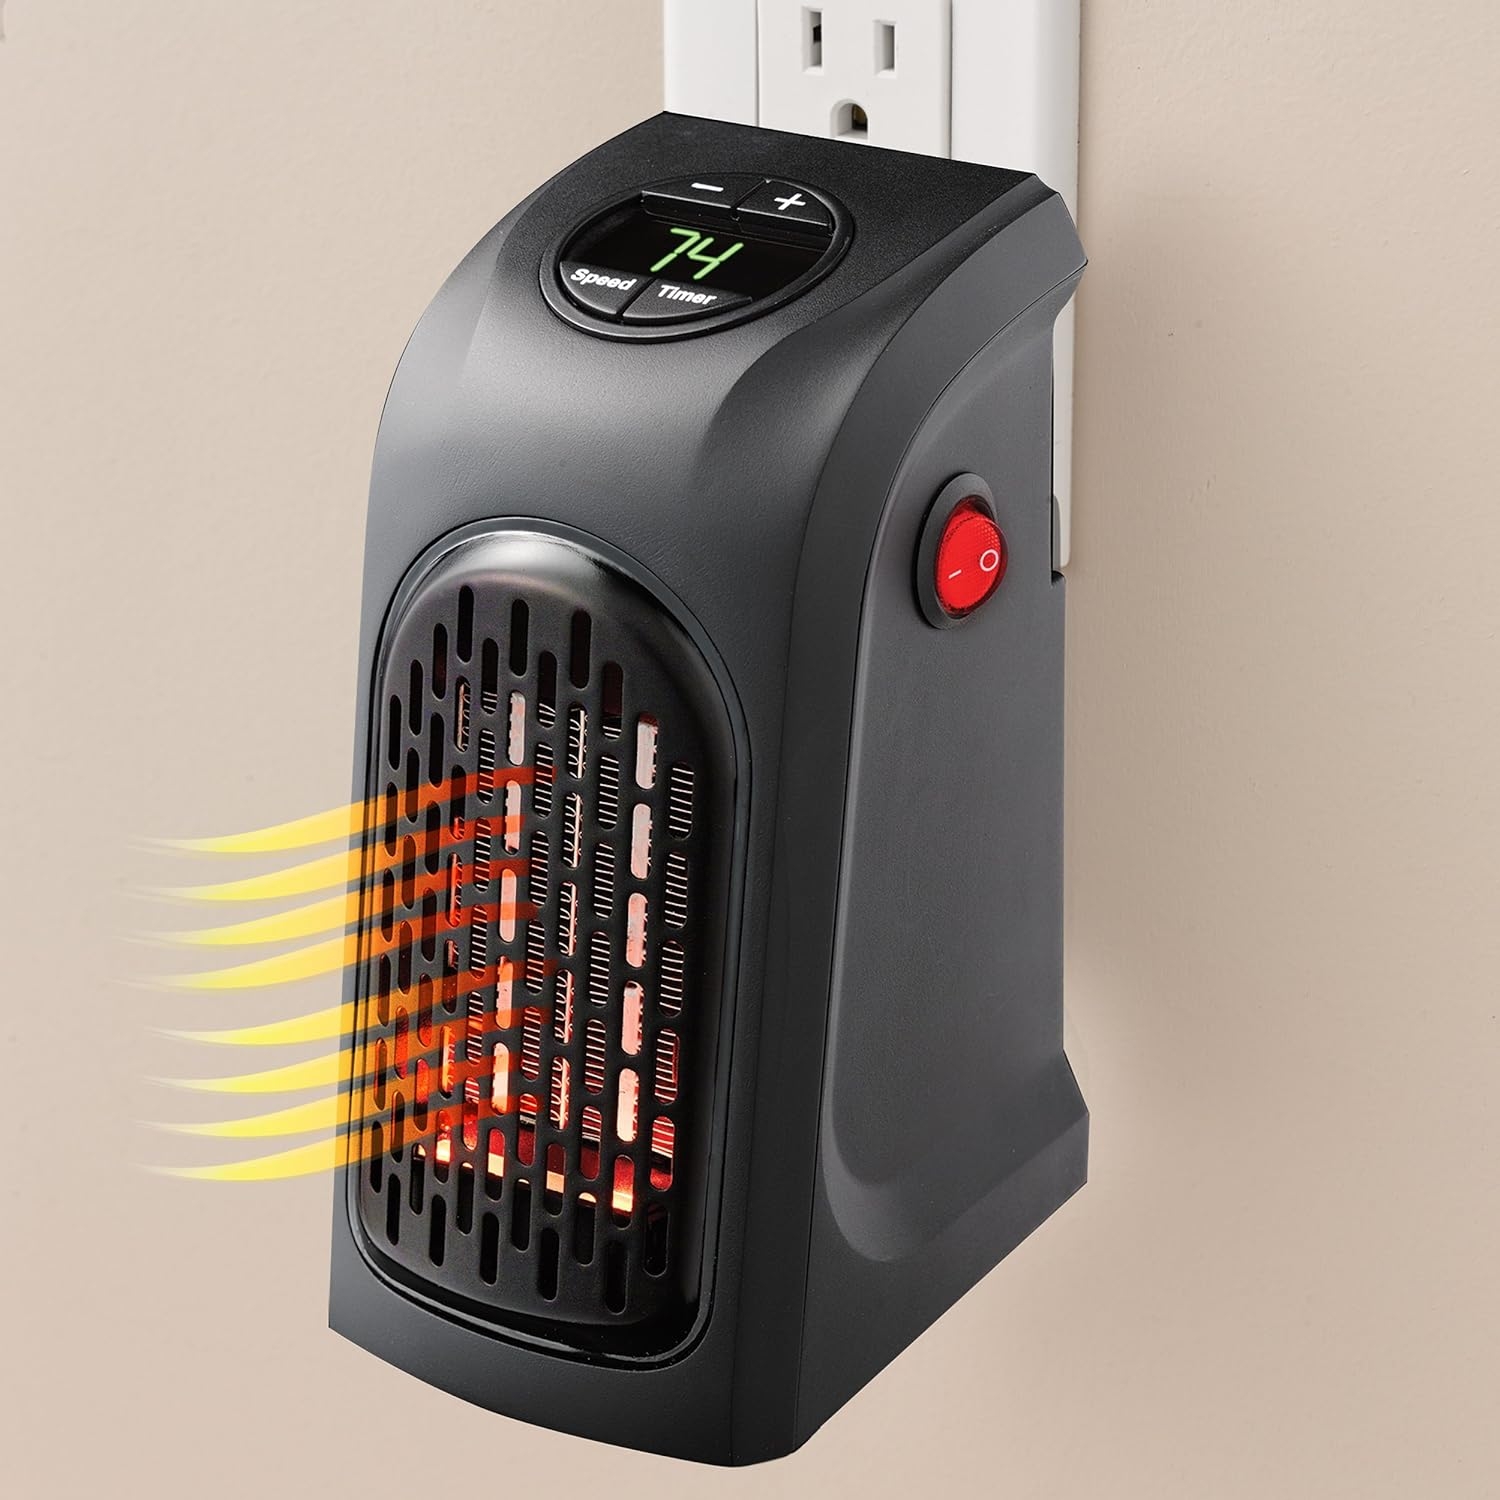 Ontel Handy Heater | Plug-in Personal Heater | Compact Design | Quick and Easy Heat | Digital Display | Great for Travel | On/Off with Timer